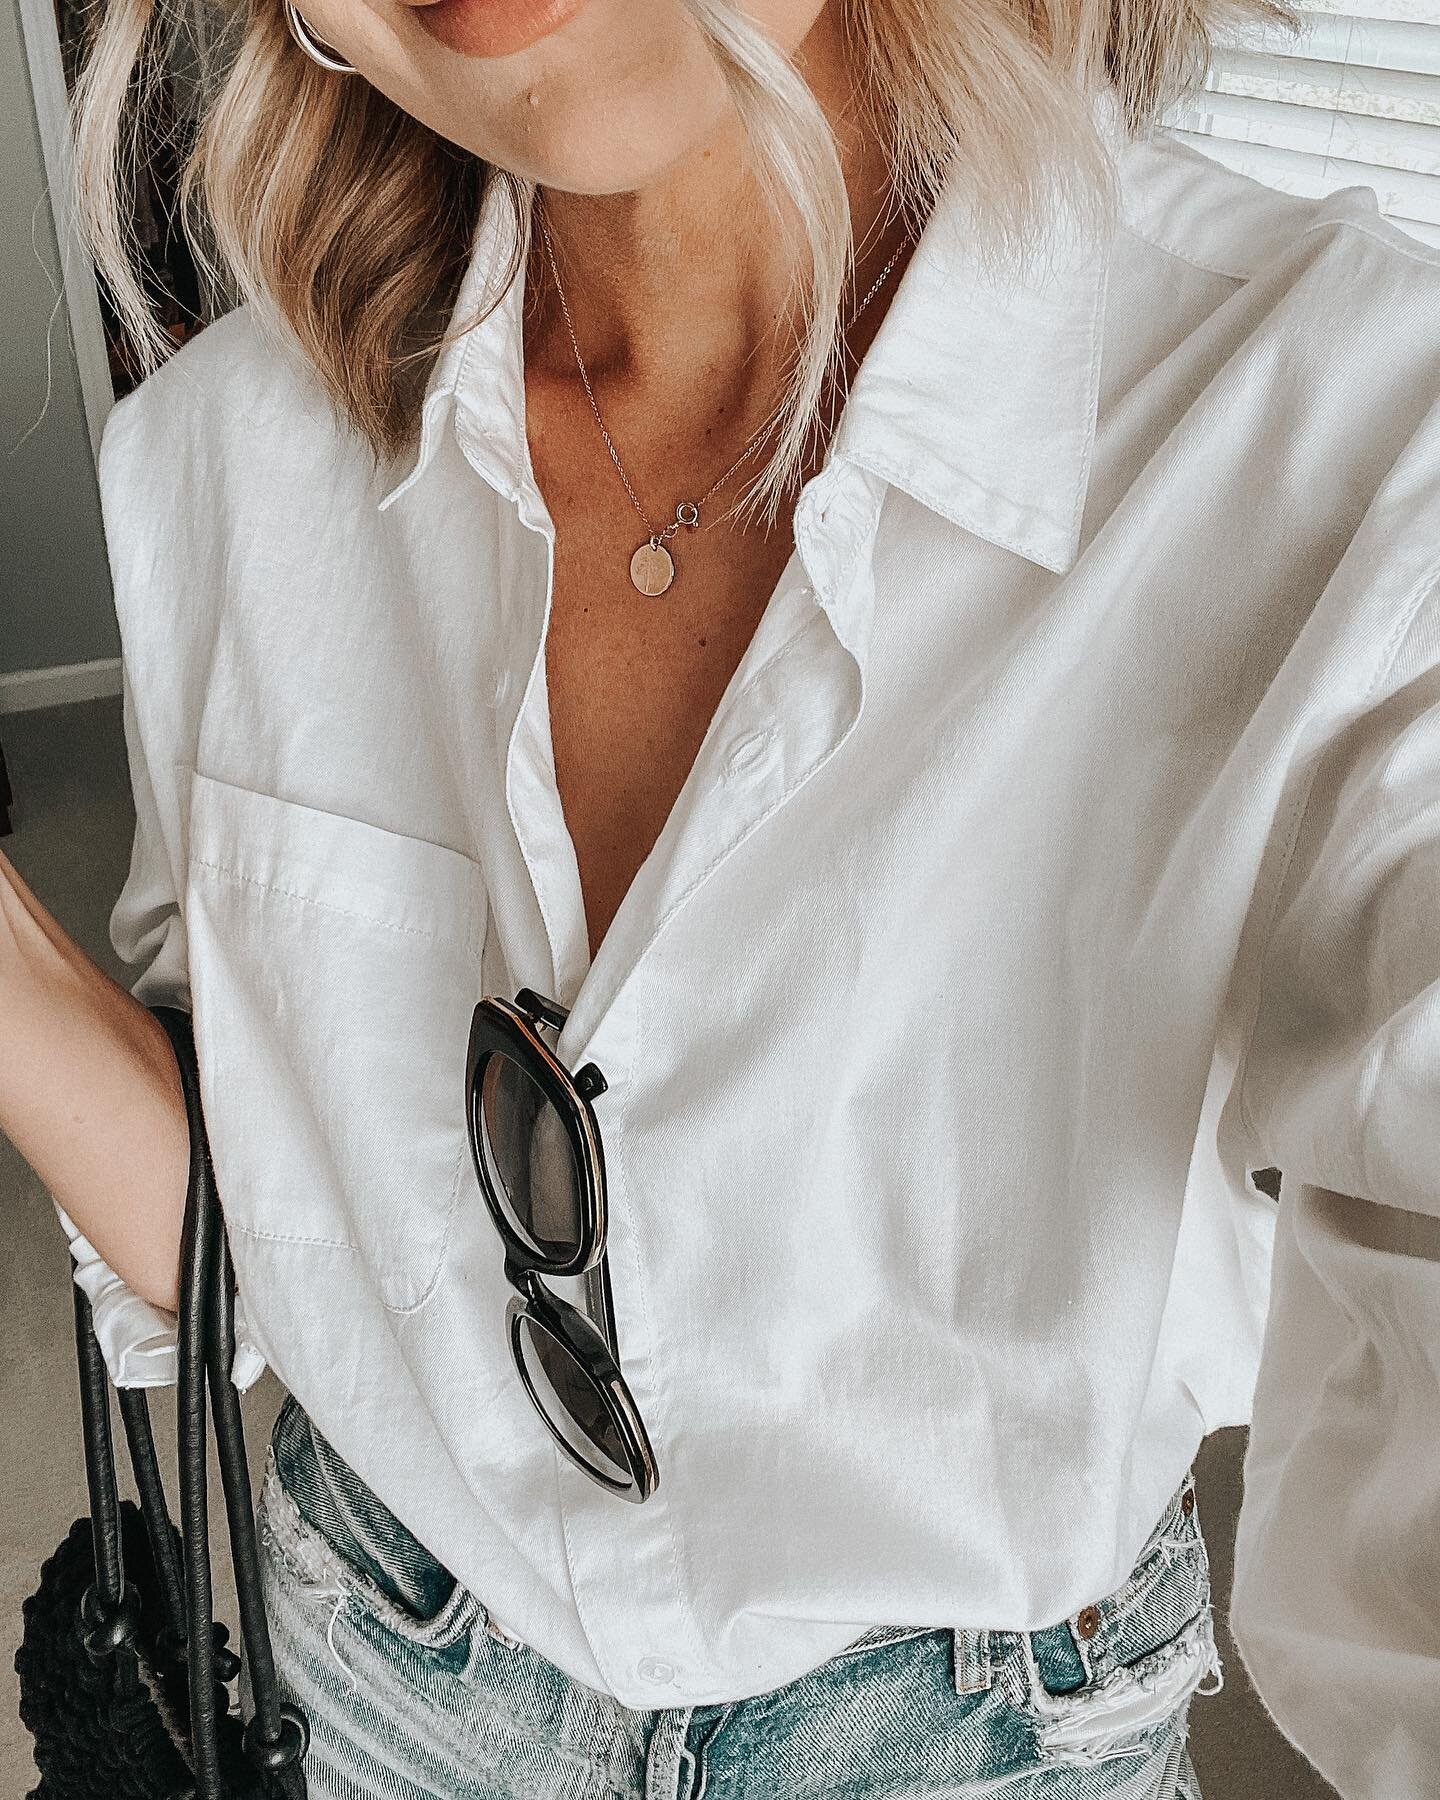 Just a few favorite summer staples from @able ✨

✨code melanie15 for 15% off✨

#capsulewardrobe #summercapsulewardrobe #ableasyouare #whiteshirtstyle #summervibes #summeroutfit #summerstyle #summerfashion #whiteshirtoutfit